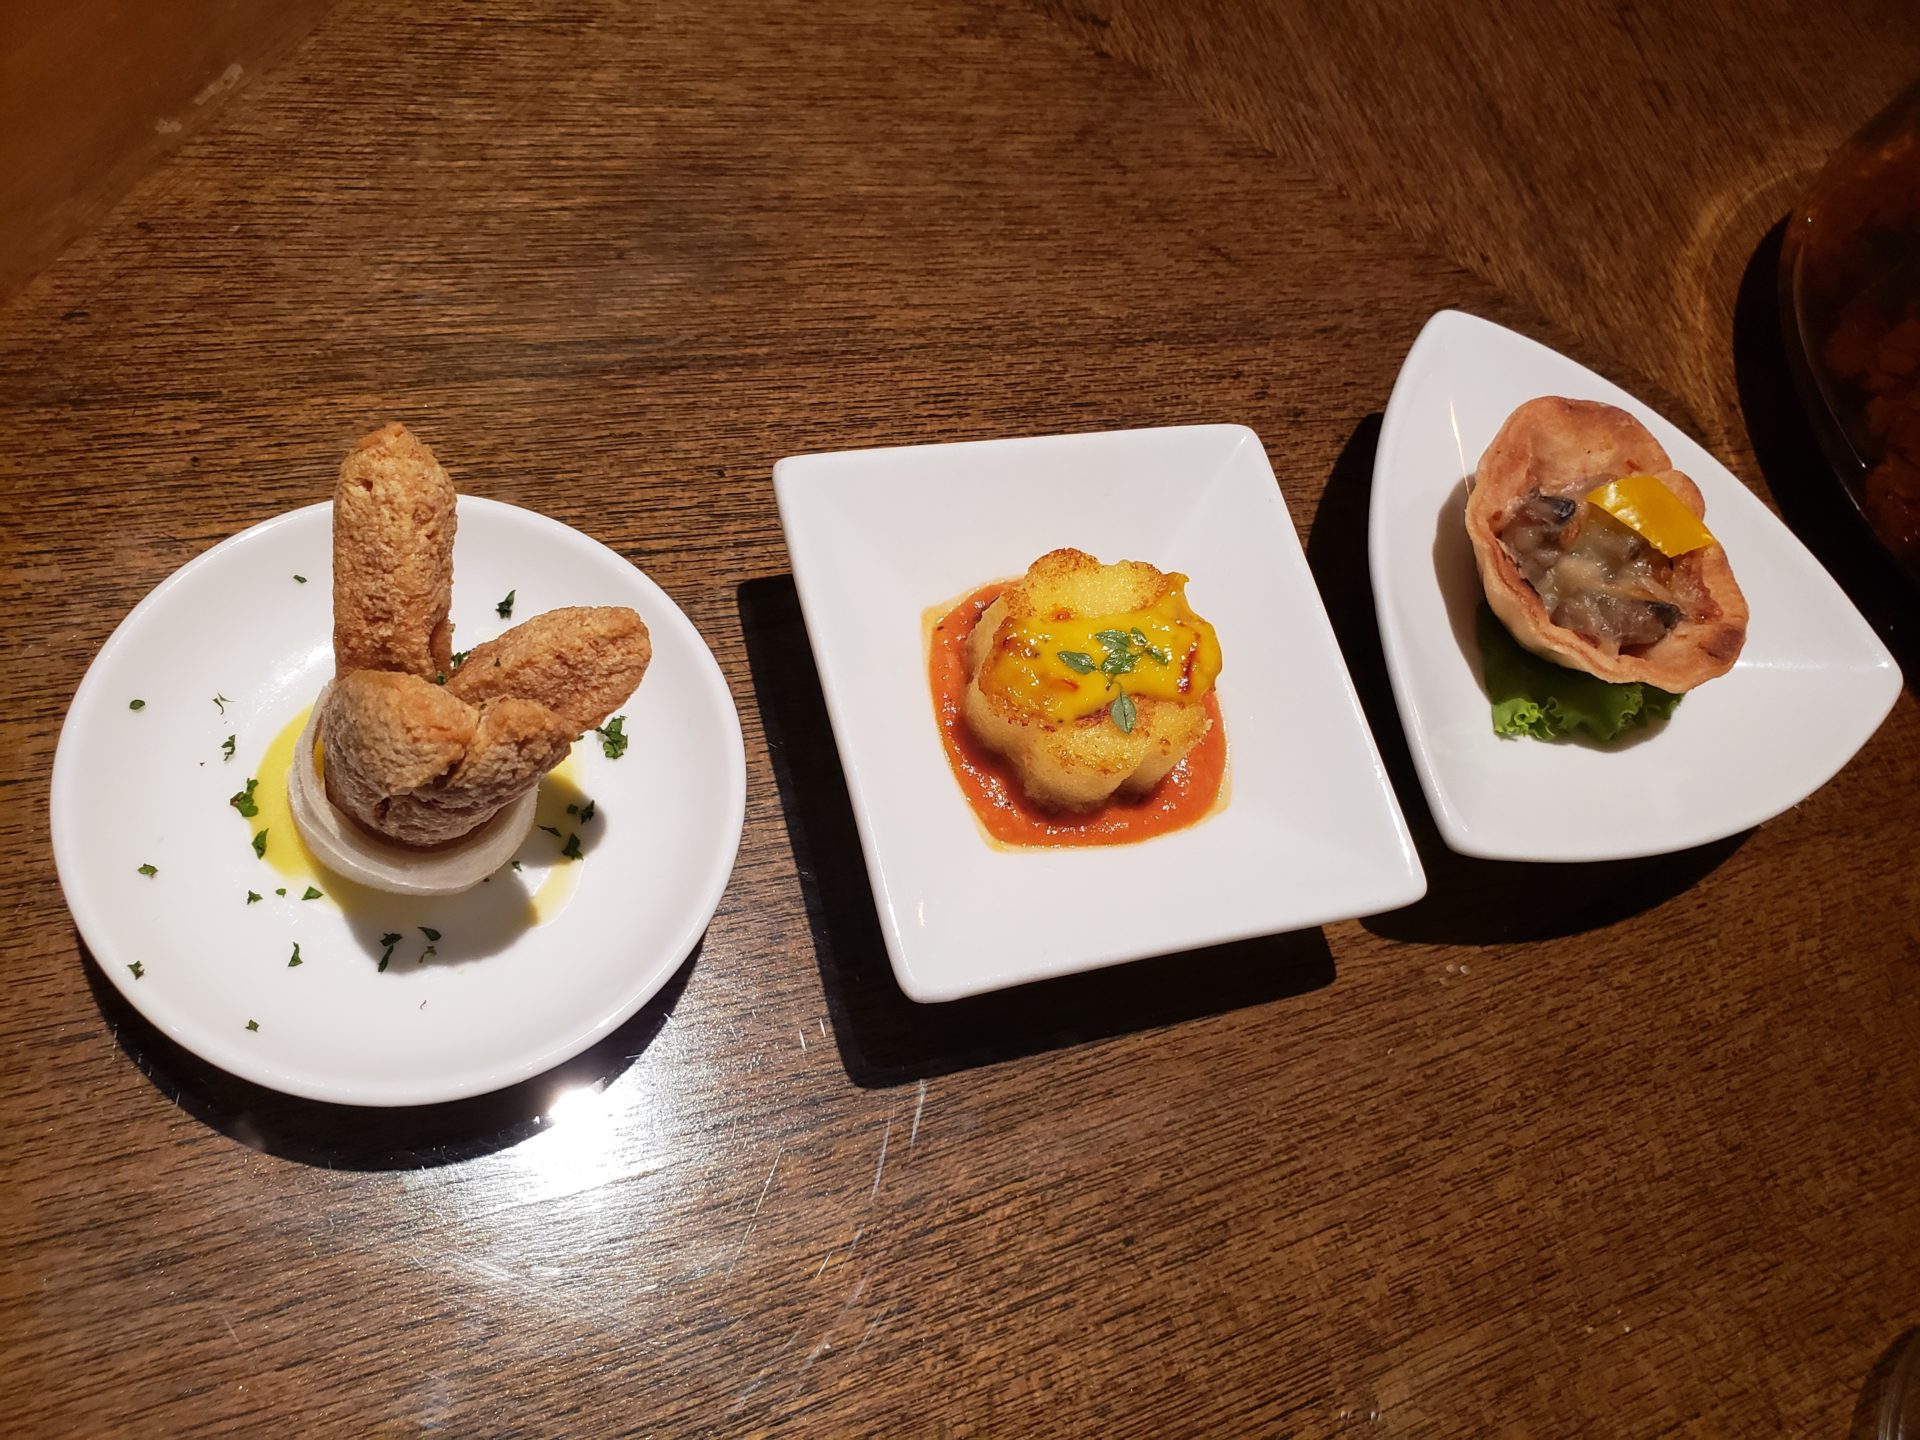 a group of small plates with food on them